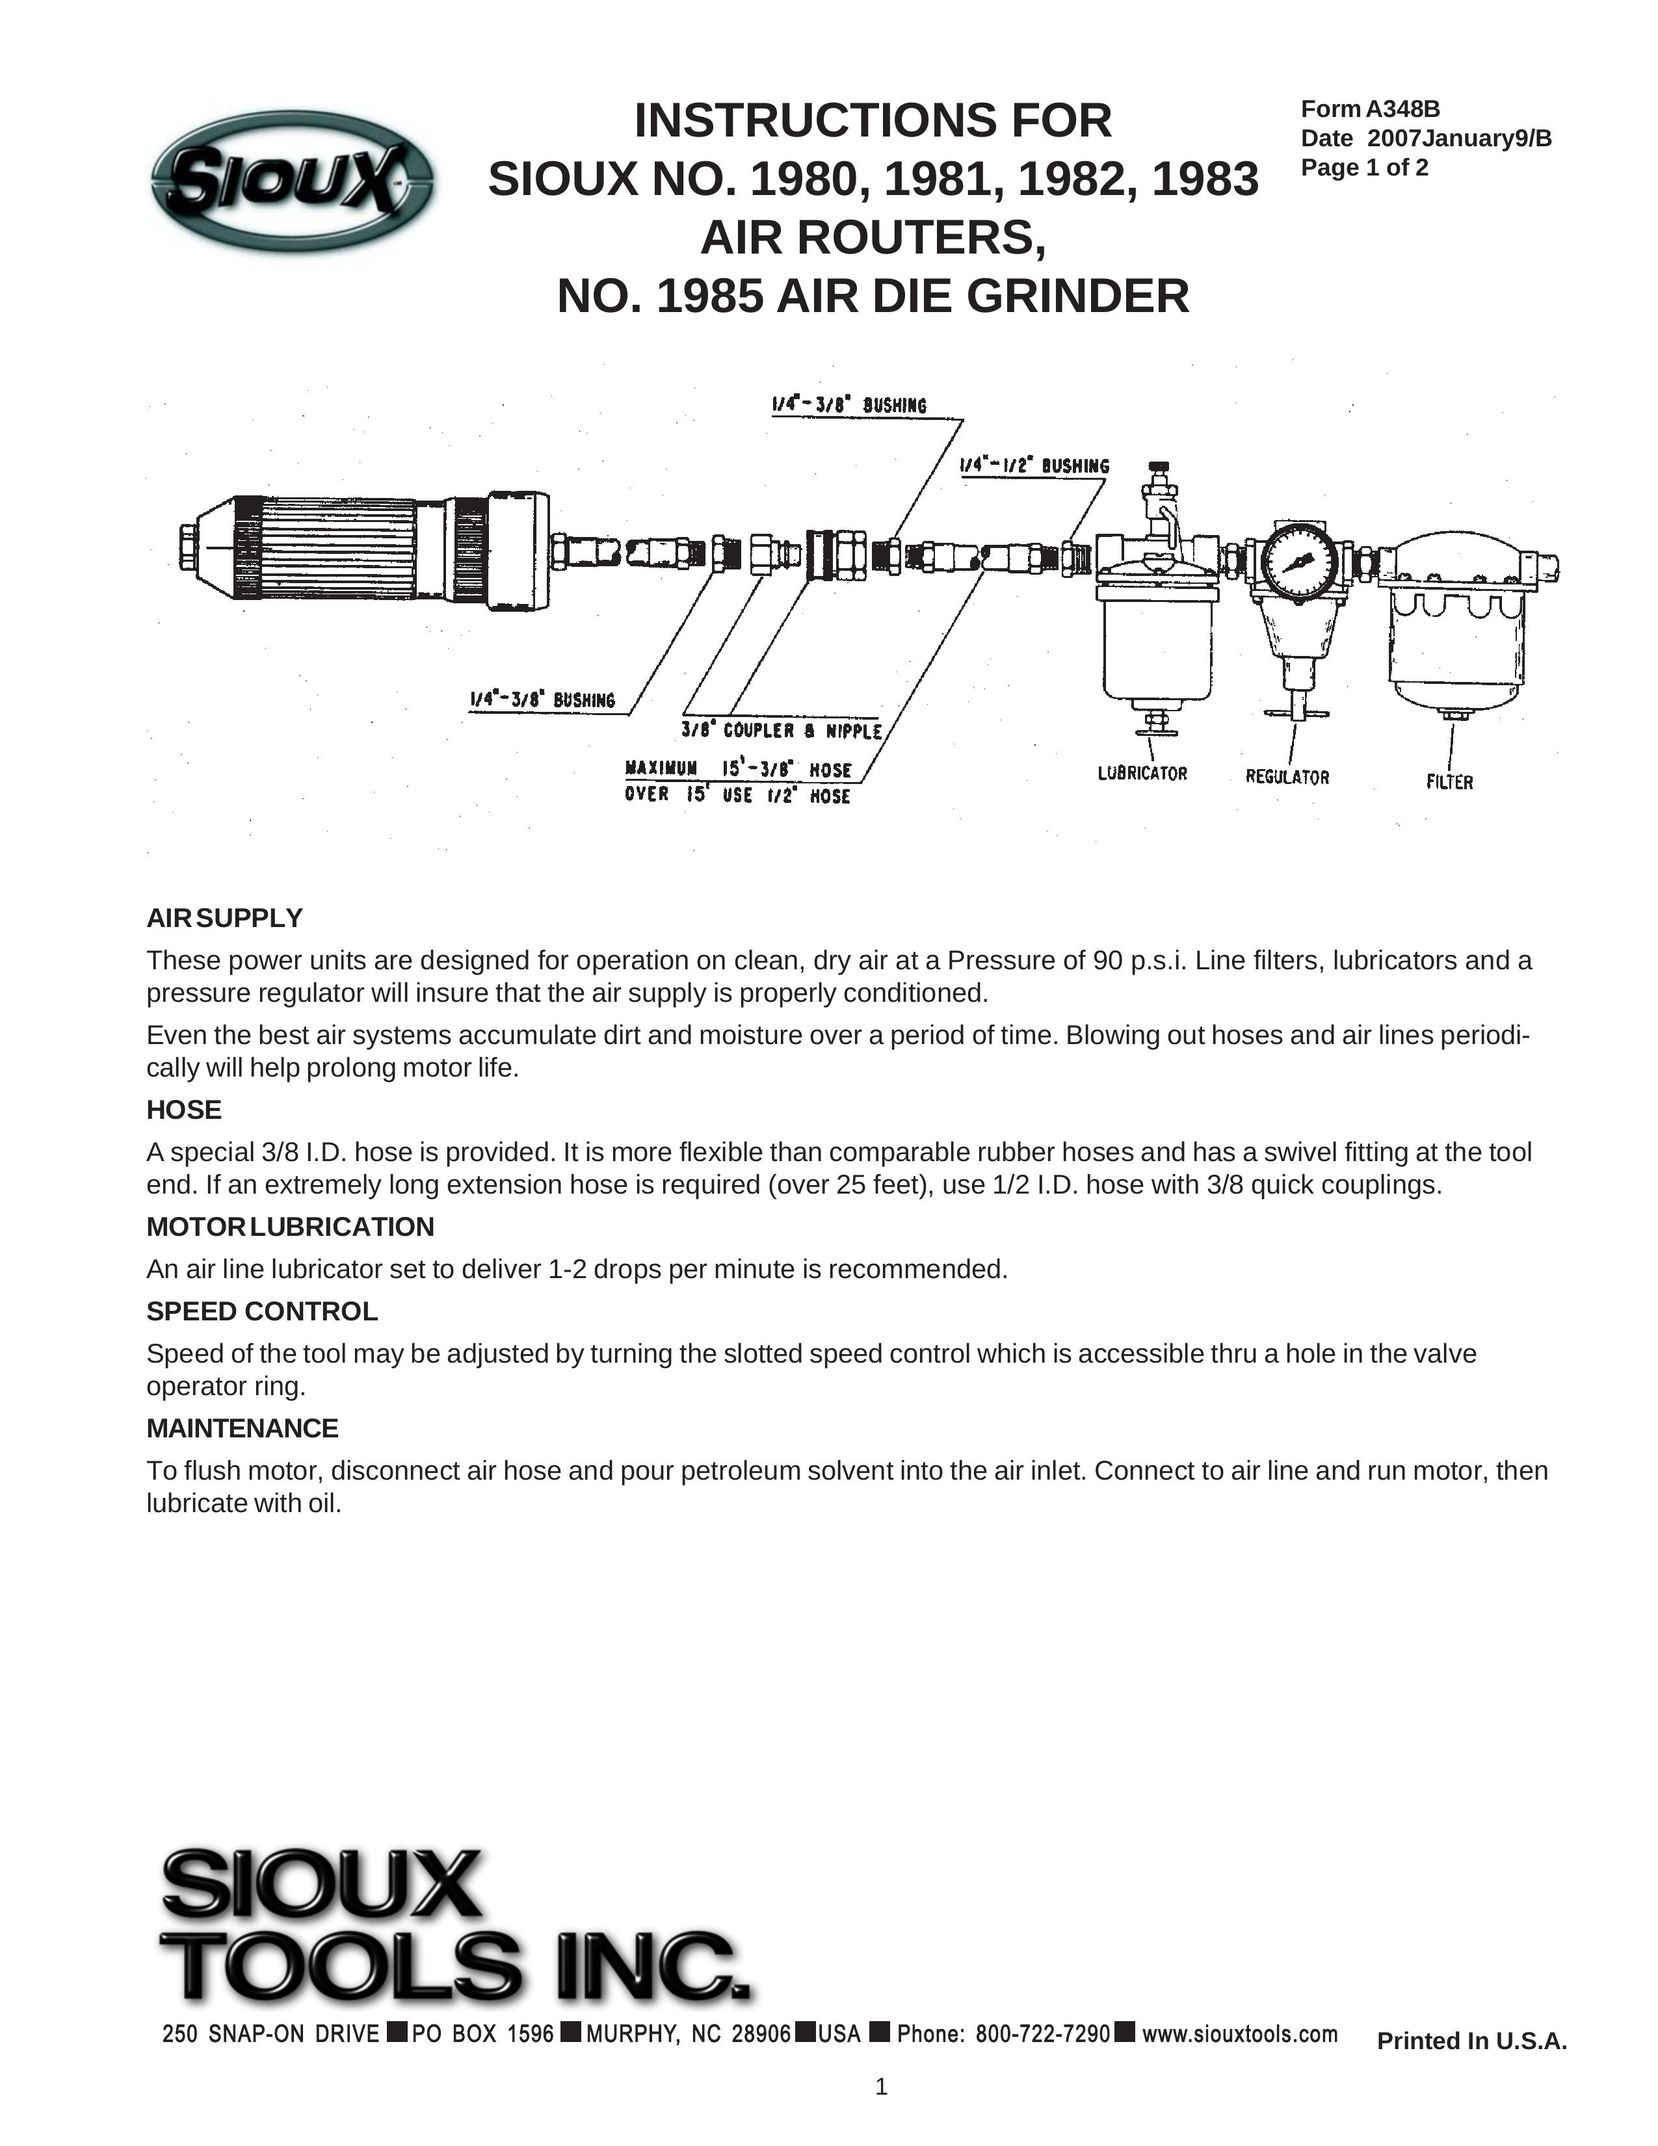 Sioux Tools 1981 Grinder User Manual